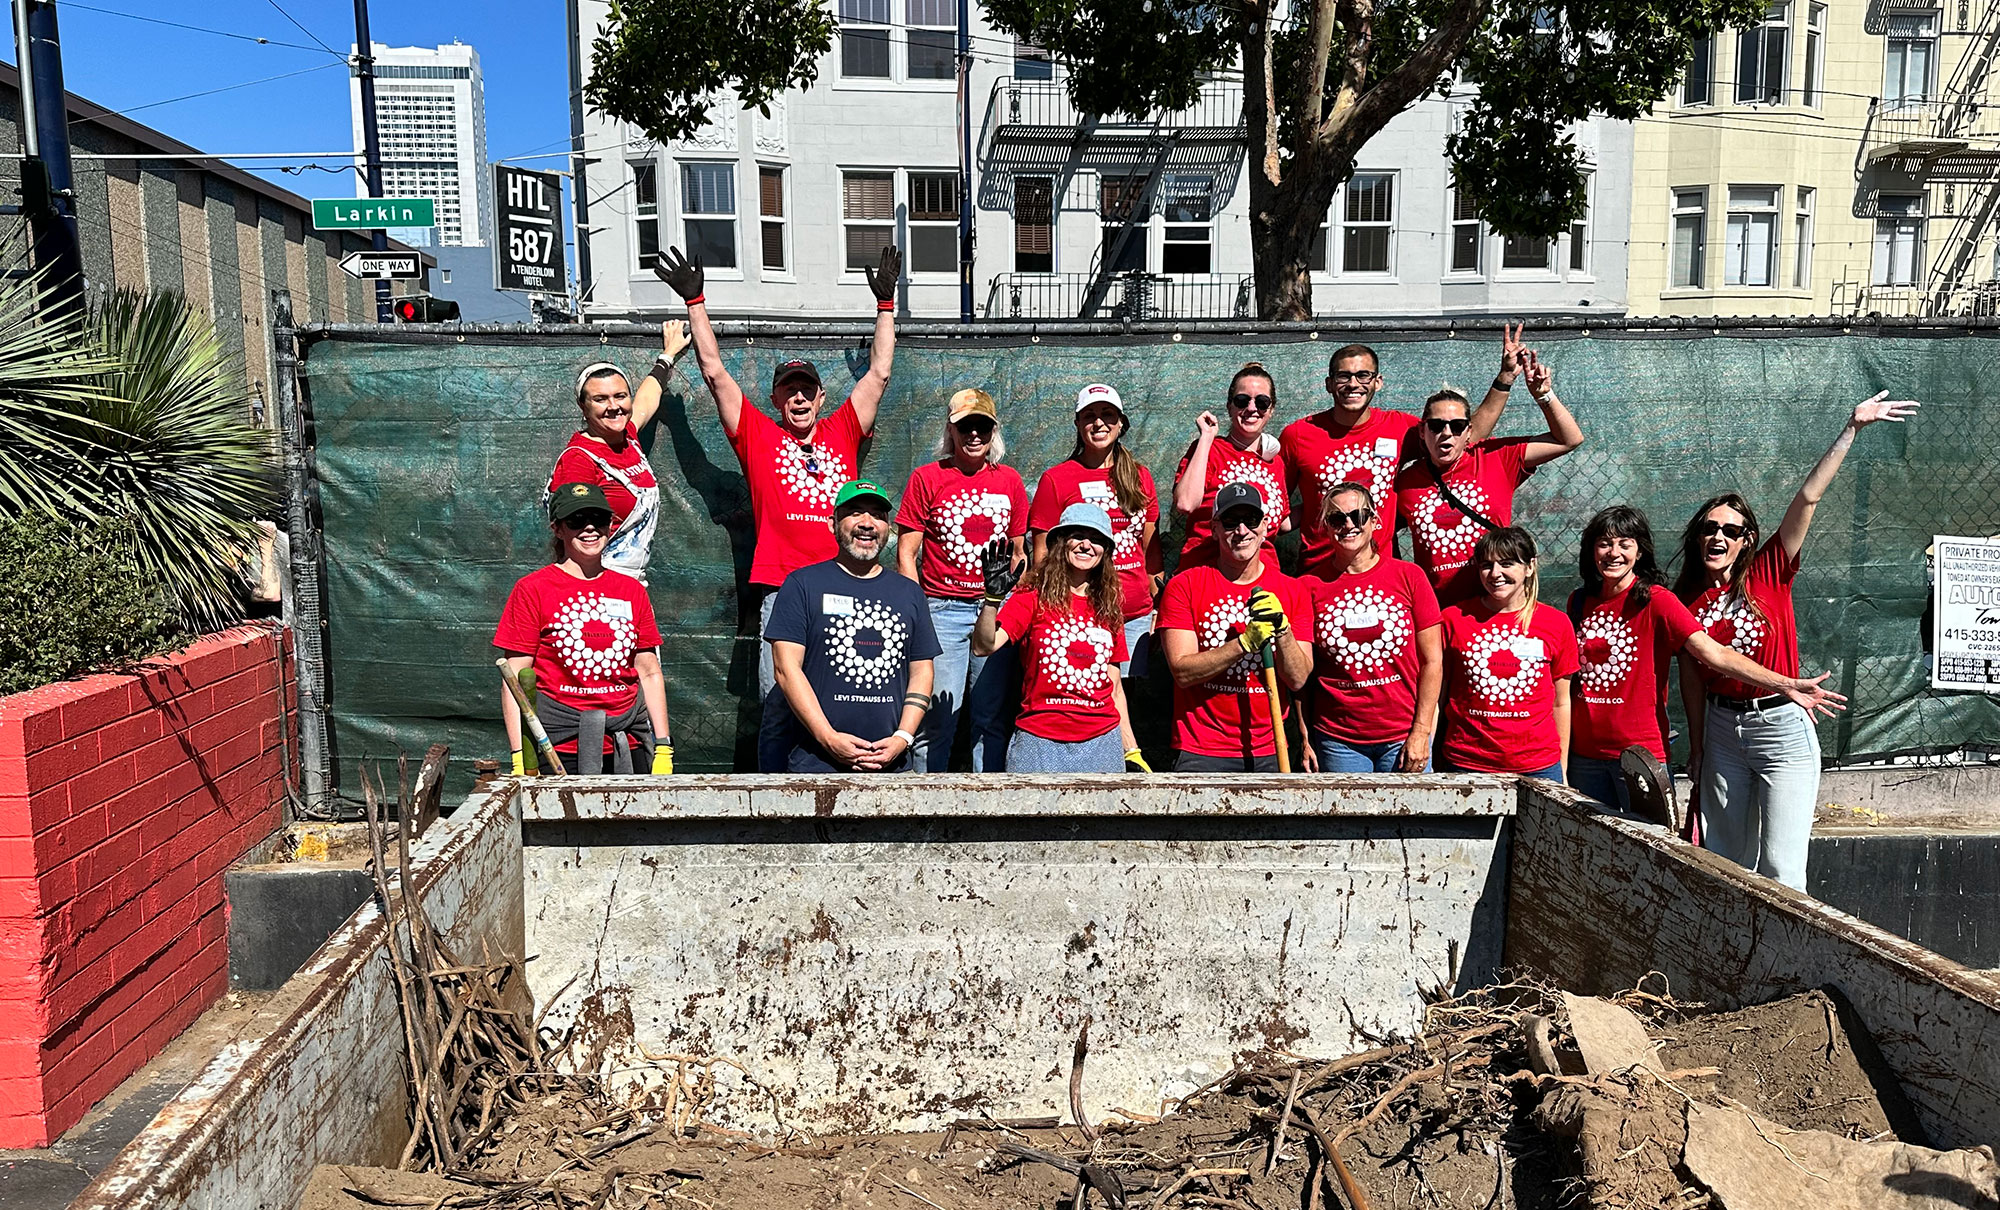 LS&Co. employee volunteers pose for a group photo at the Phoenix Hotel in San Francisco.